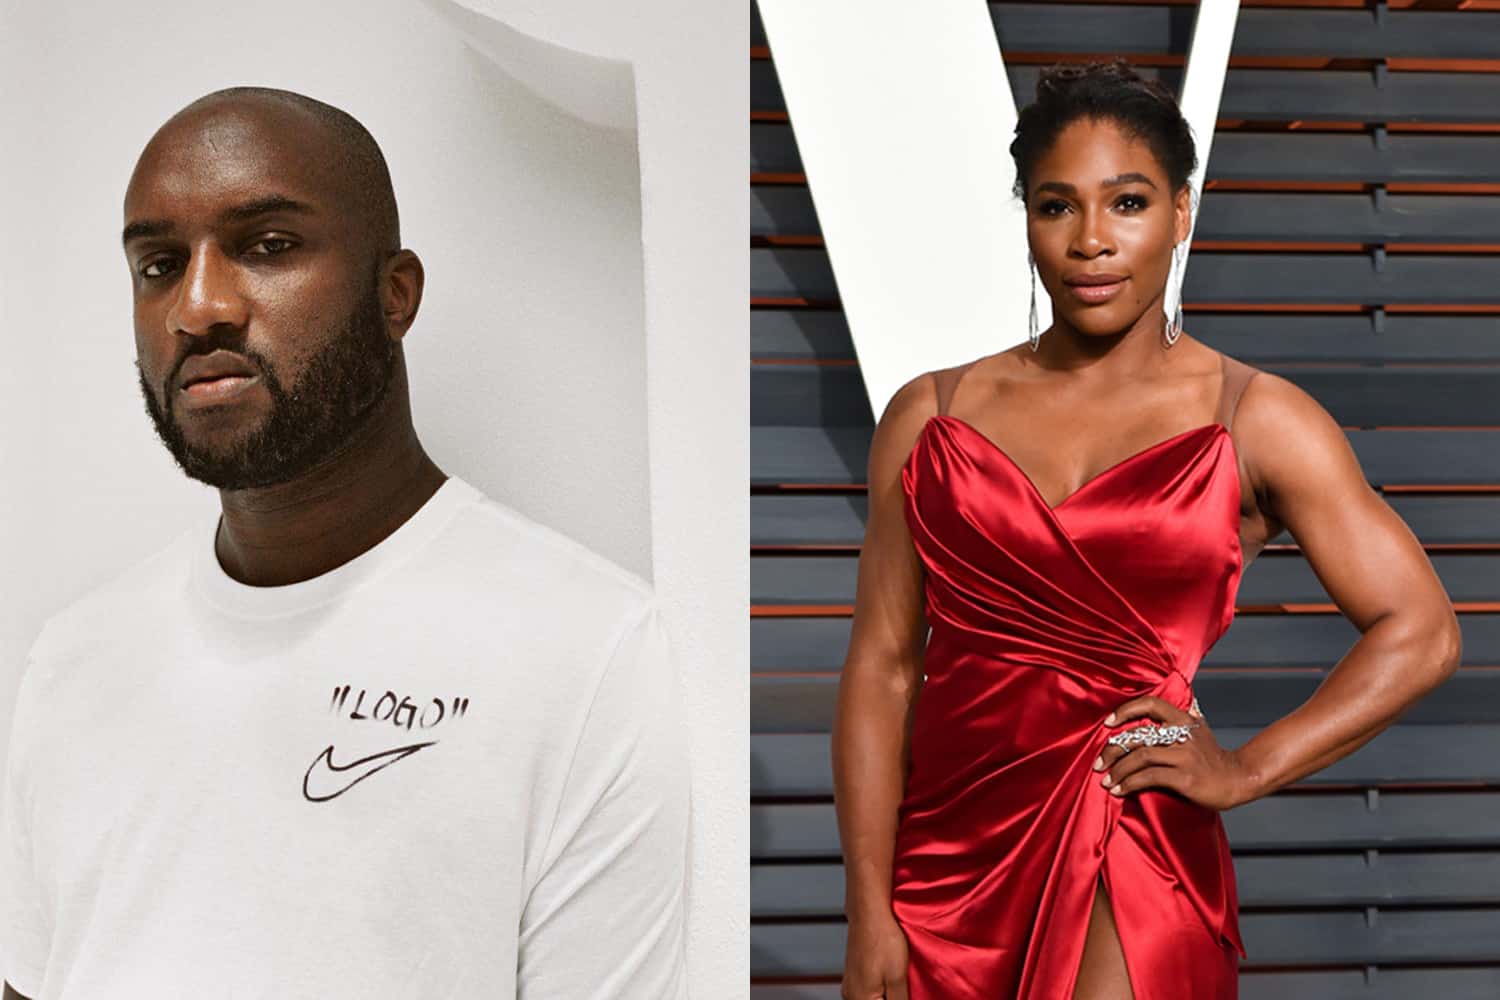 virgil abloh serena williams collection name